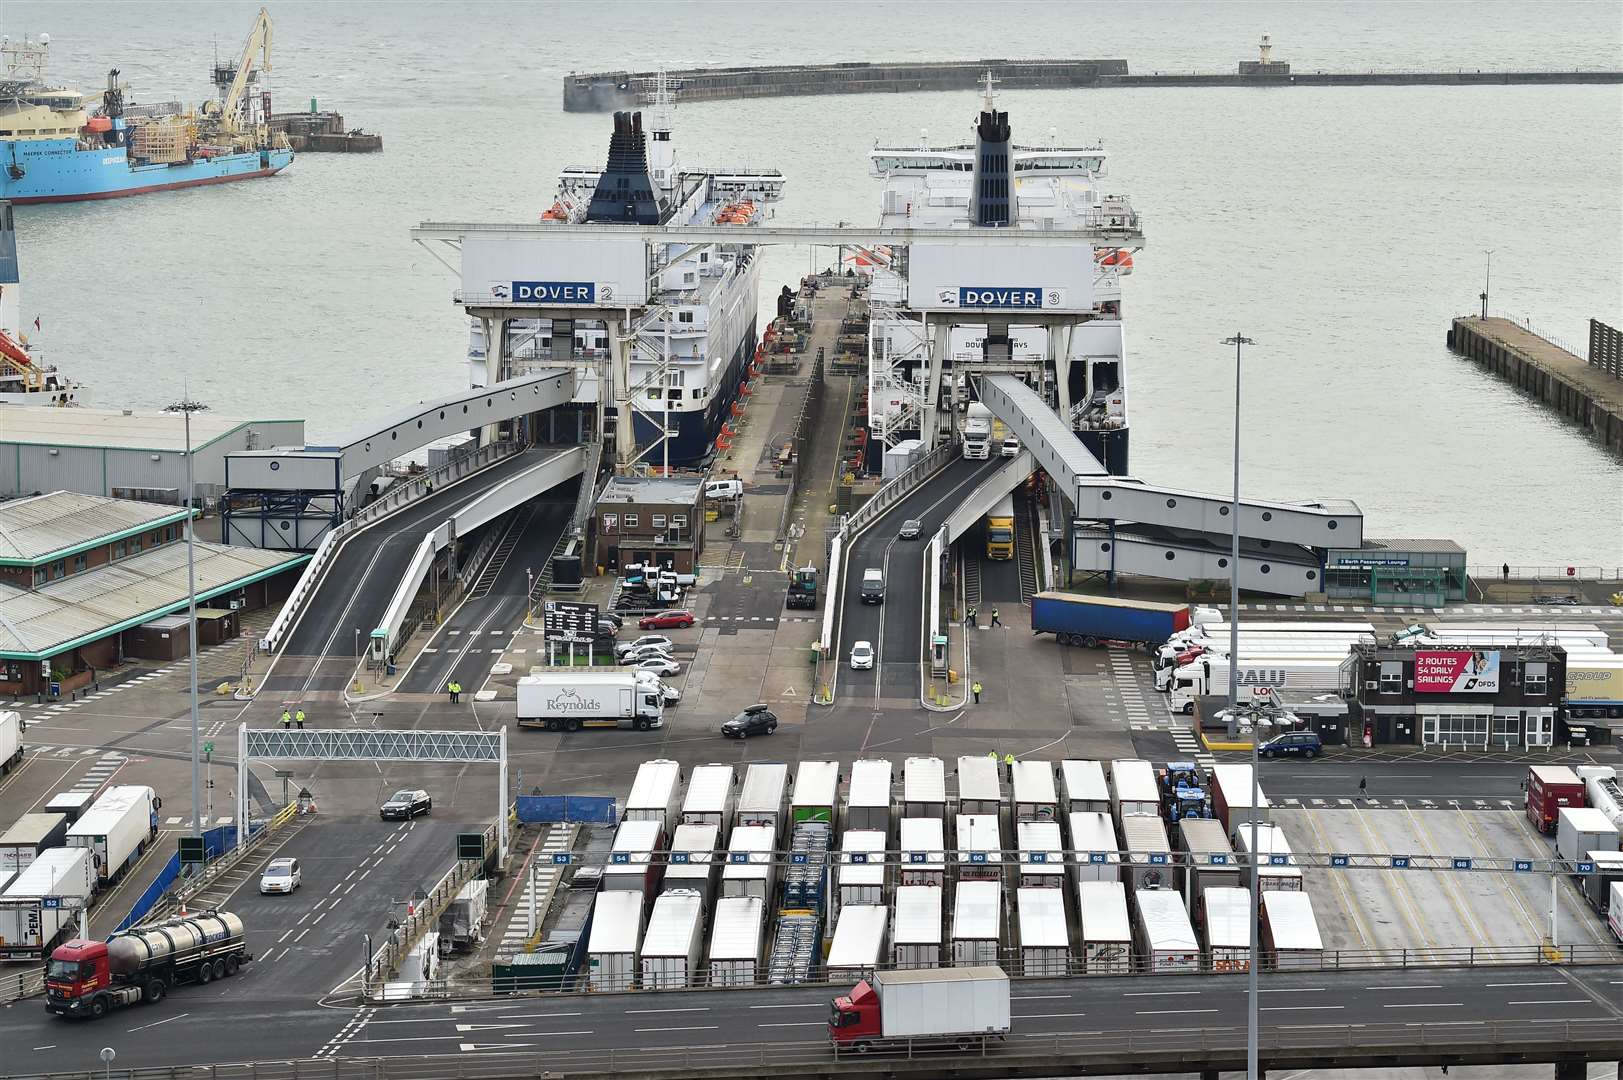 Travel through the Port of Dover will be affected by the ban. Picture: Glyn Kirk/AFP/Getty Images